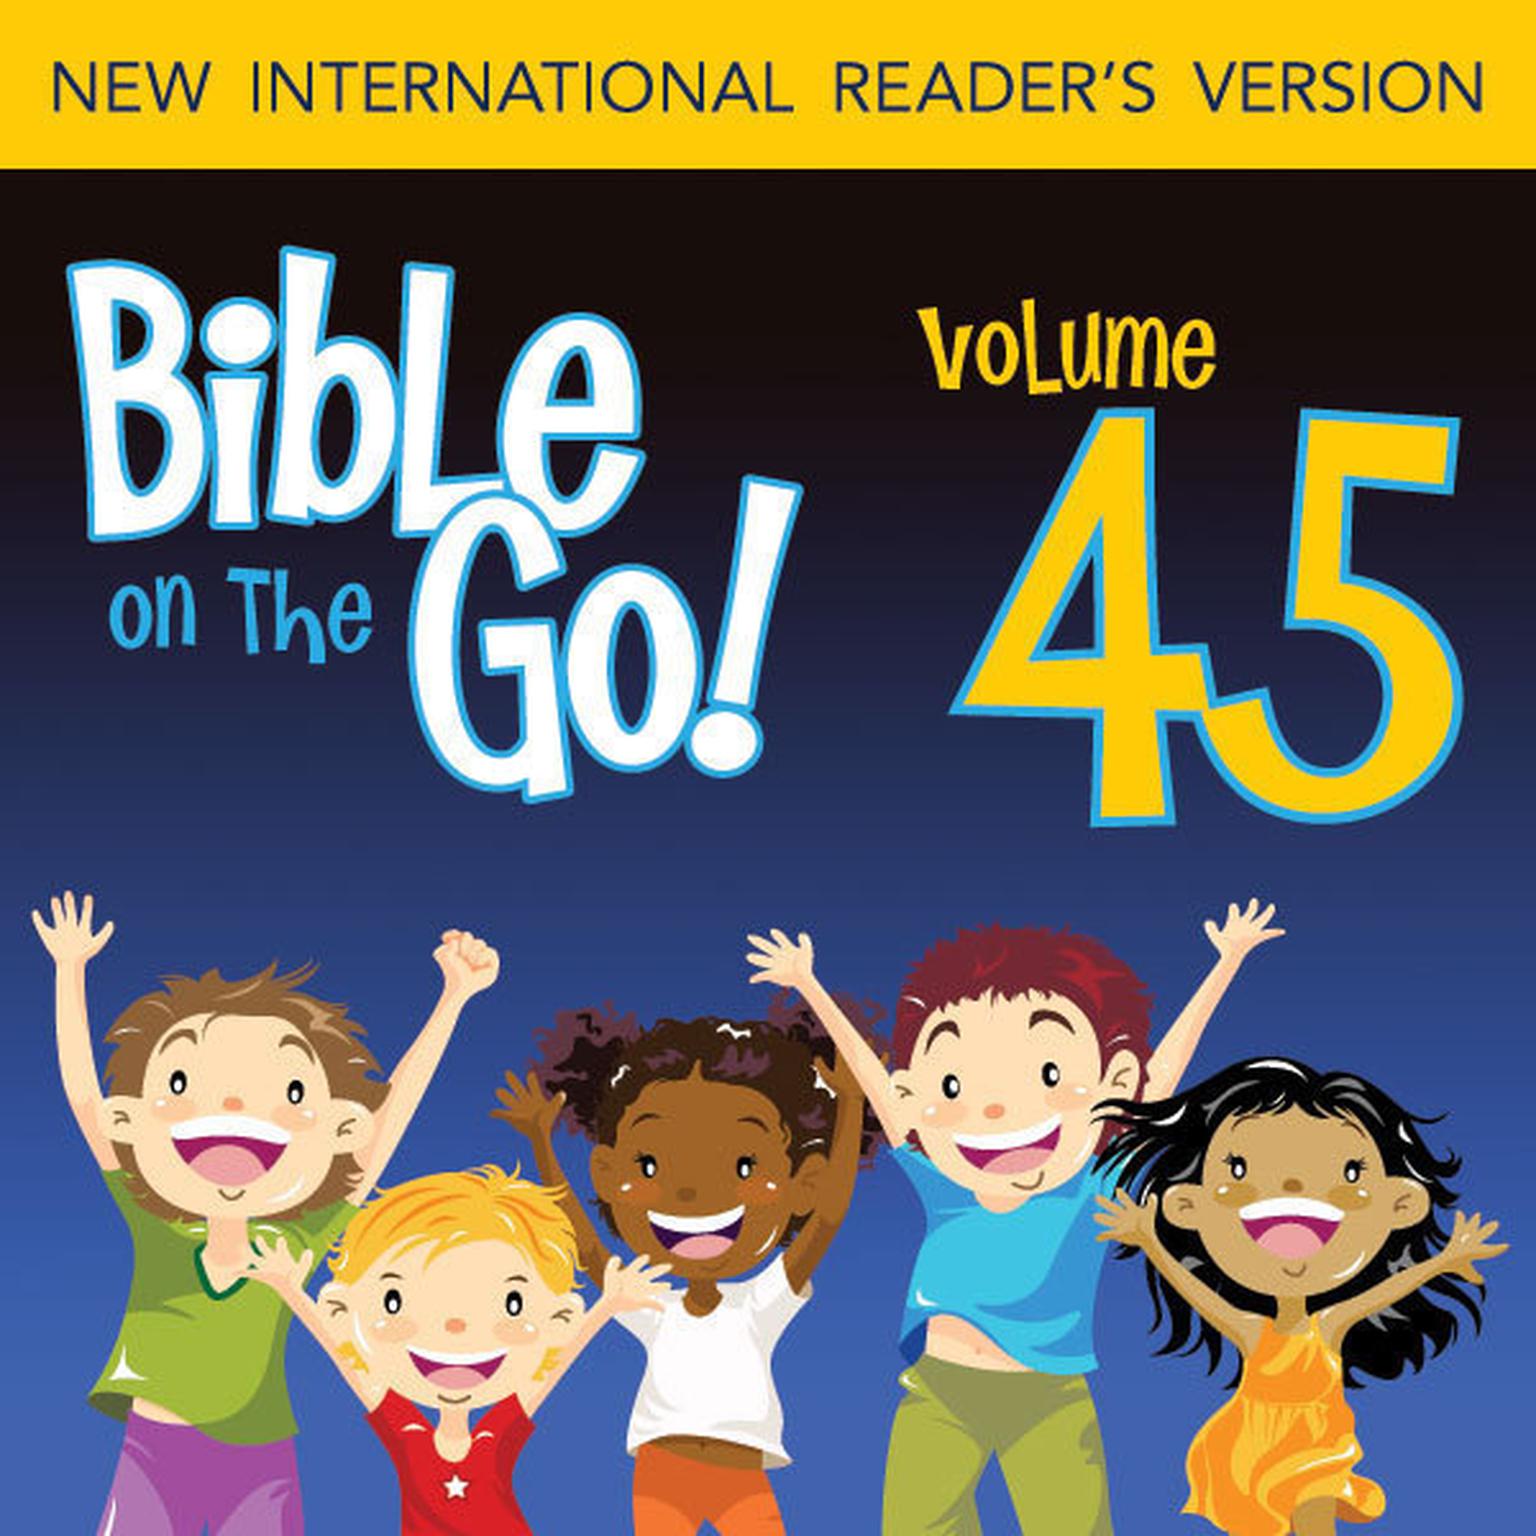 Bible on the Go Audio Bible - New International Readers Version, NIrV: Vol. 45 Paul and Silas; Priscilla and Aquila; Pauls Letter to the Romans (Acts 16, 18, 20; Romans 1, 5, 8, 12): Paul and Silas; Priscilla and Aquila; Paul’s Letter to the Romans (Acts 16, 18, 20; Romans 1, 5, 8, 12) Audiobook, by Zondervan